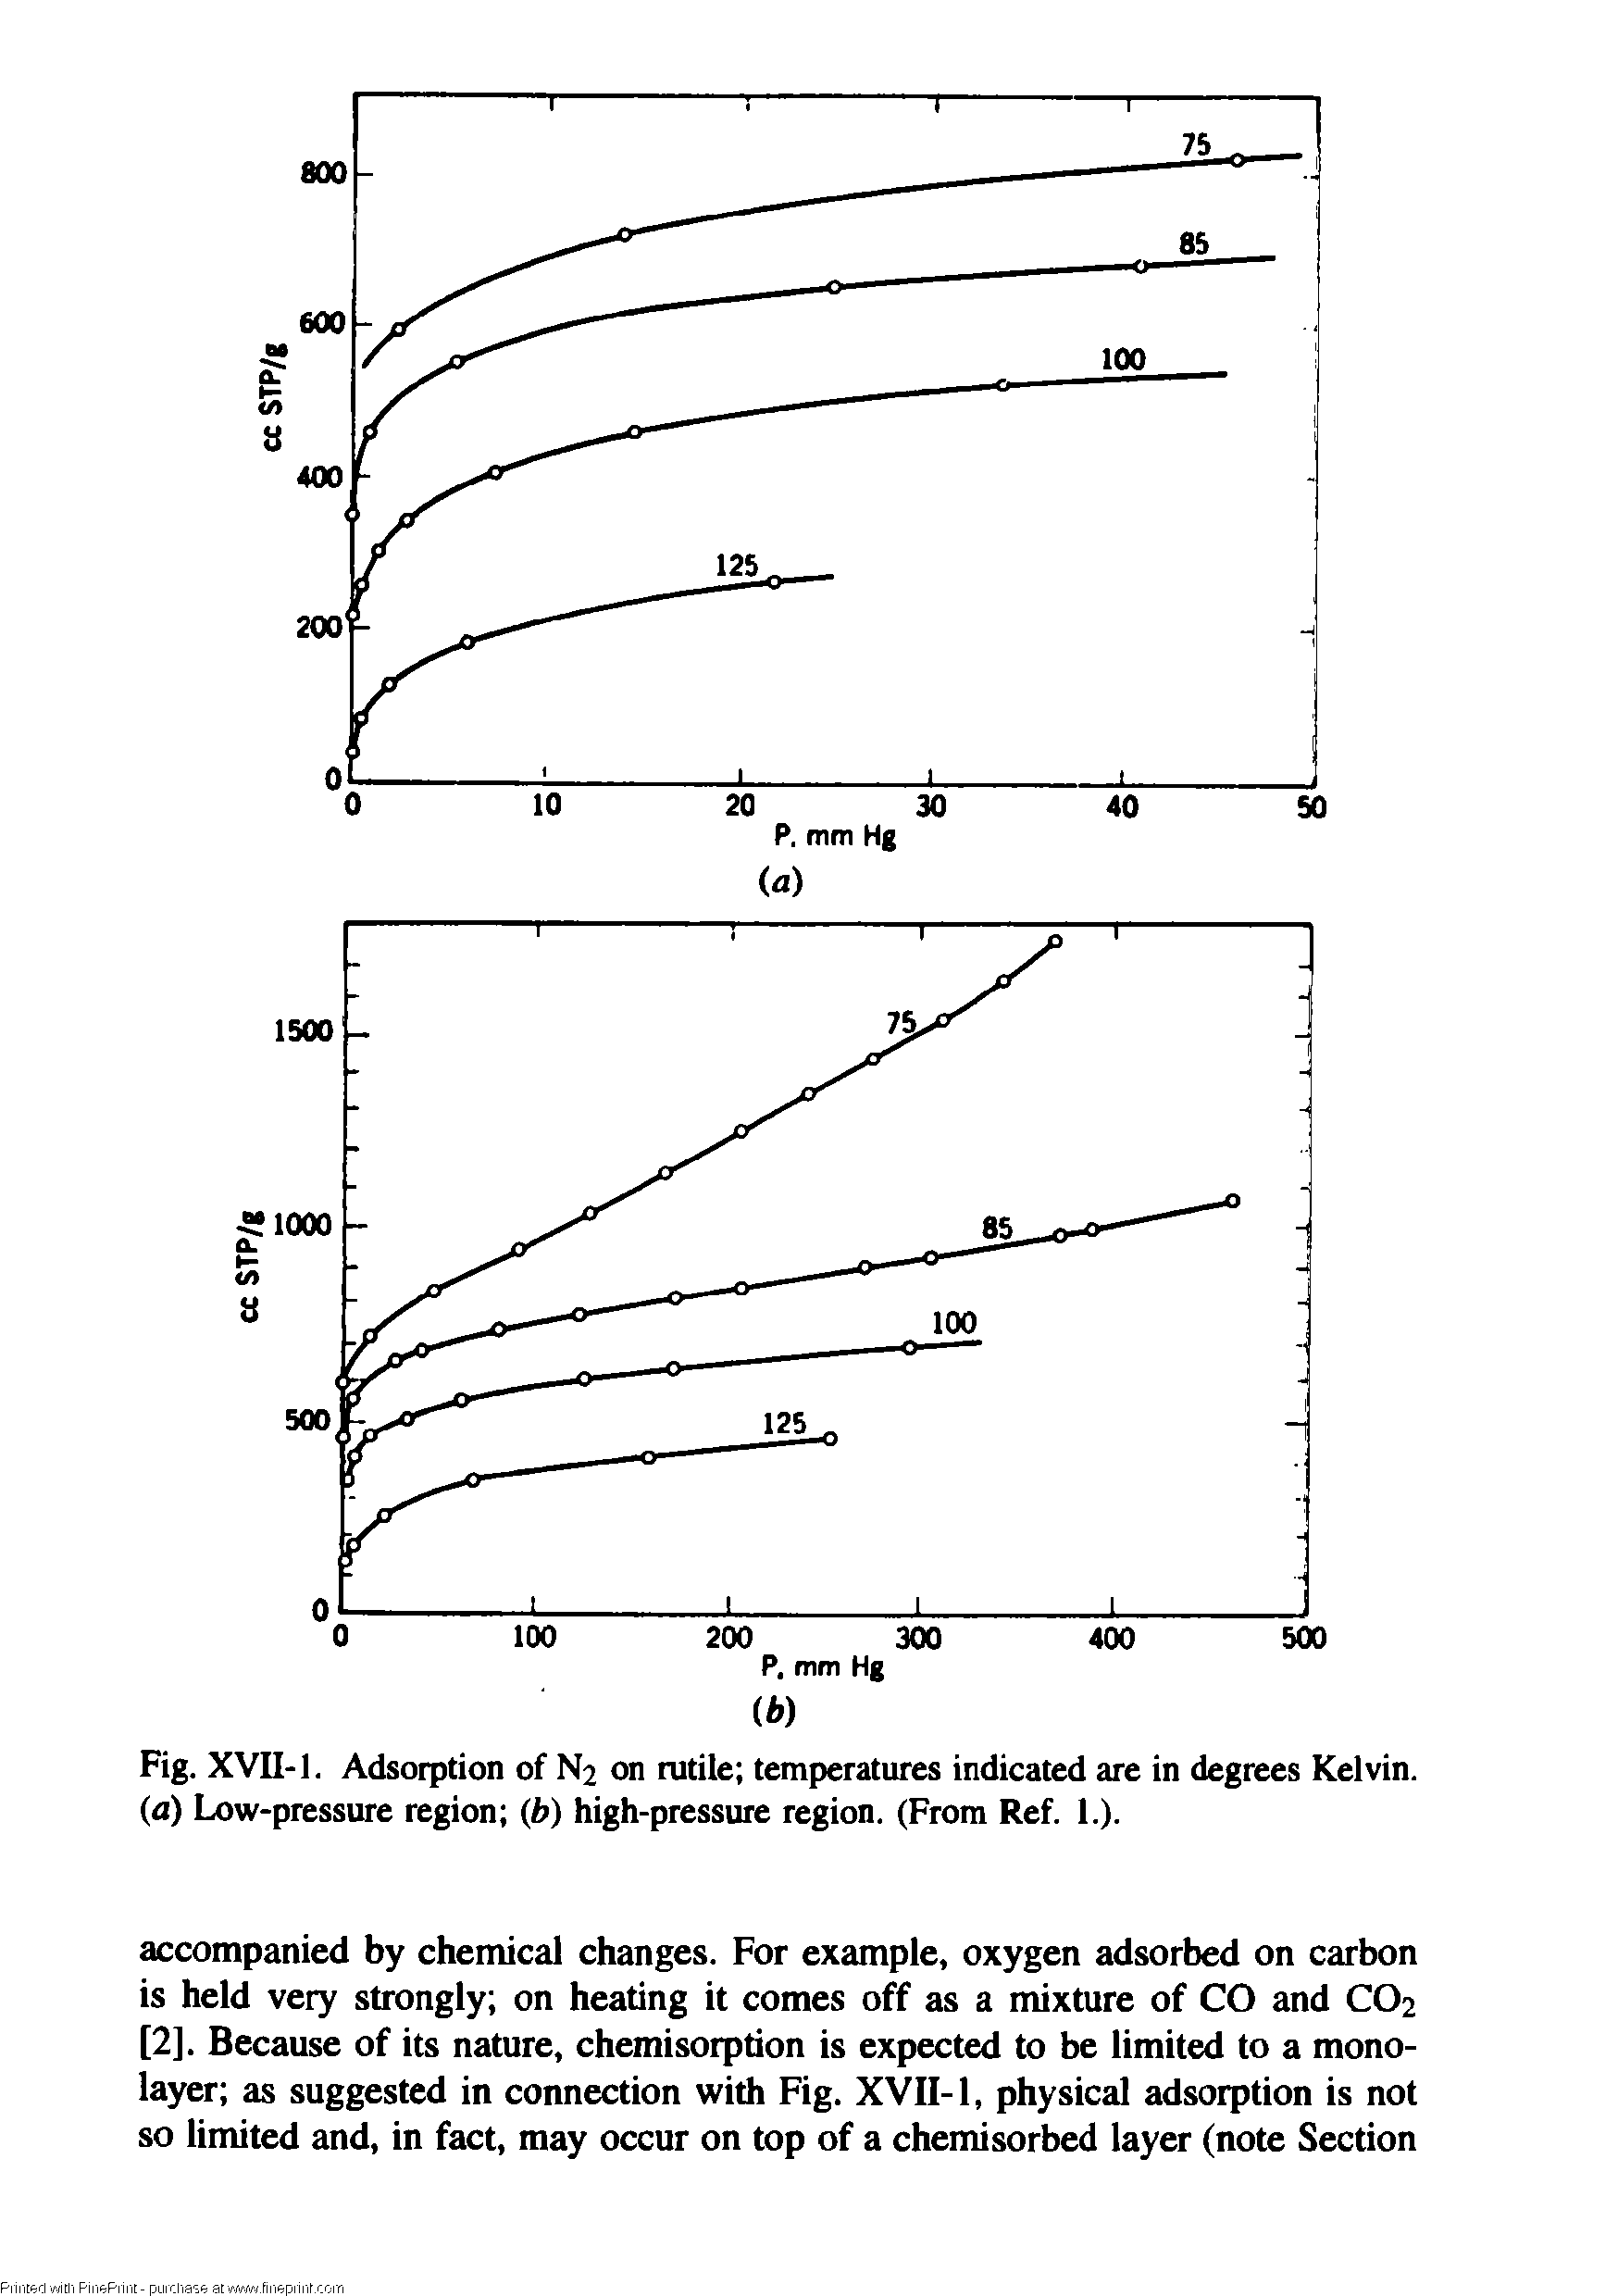 Fig. XVII-1. Adsorption of N2 on rutile temperatures indicated are in degrees Kelvin. (a) Low-pressure region (b) high-pressure region. (From Ref. 1.).